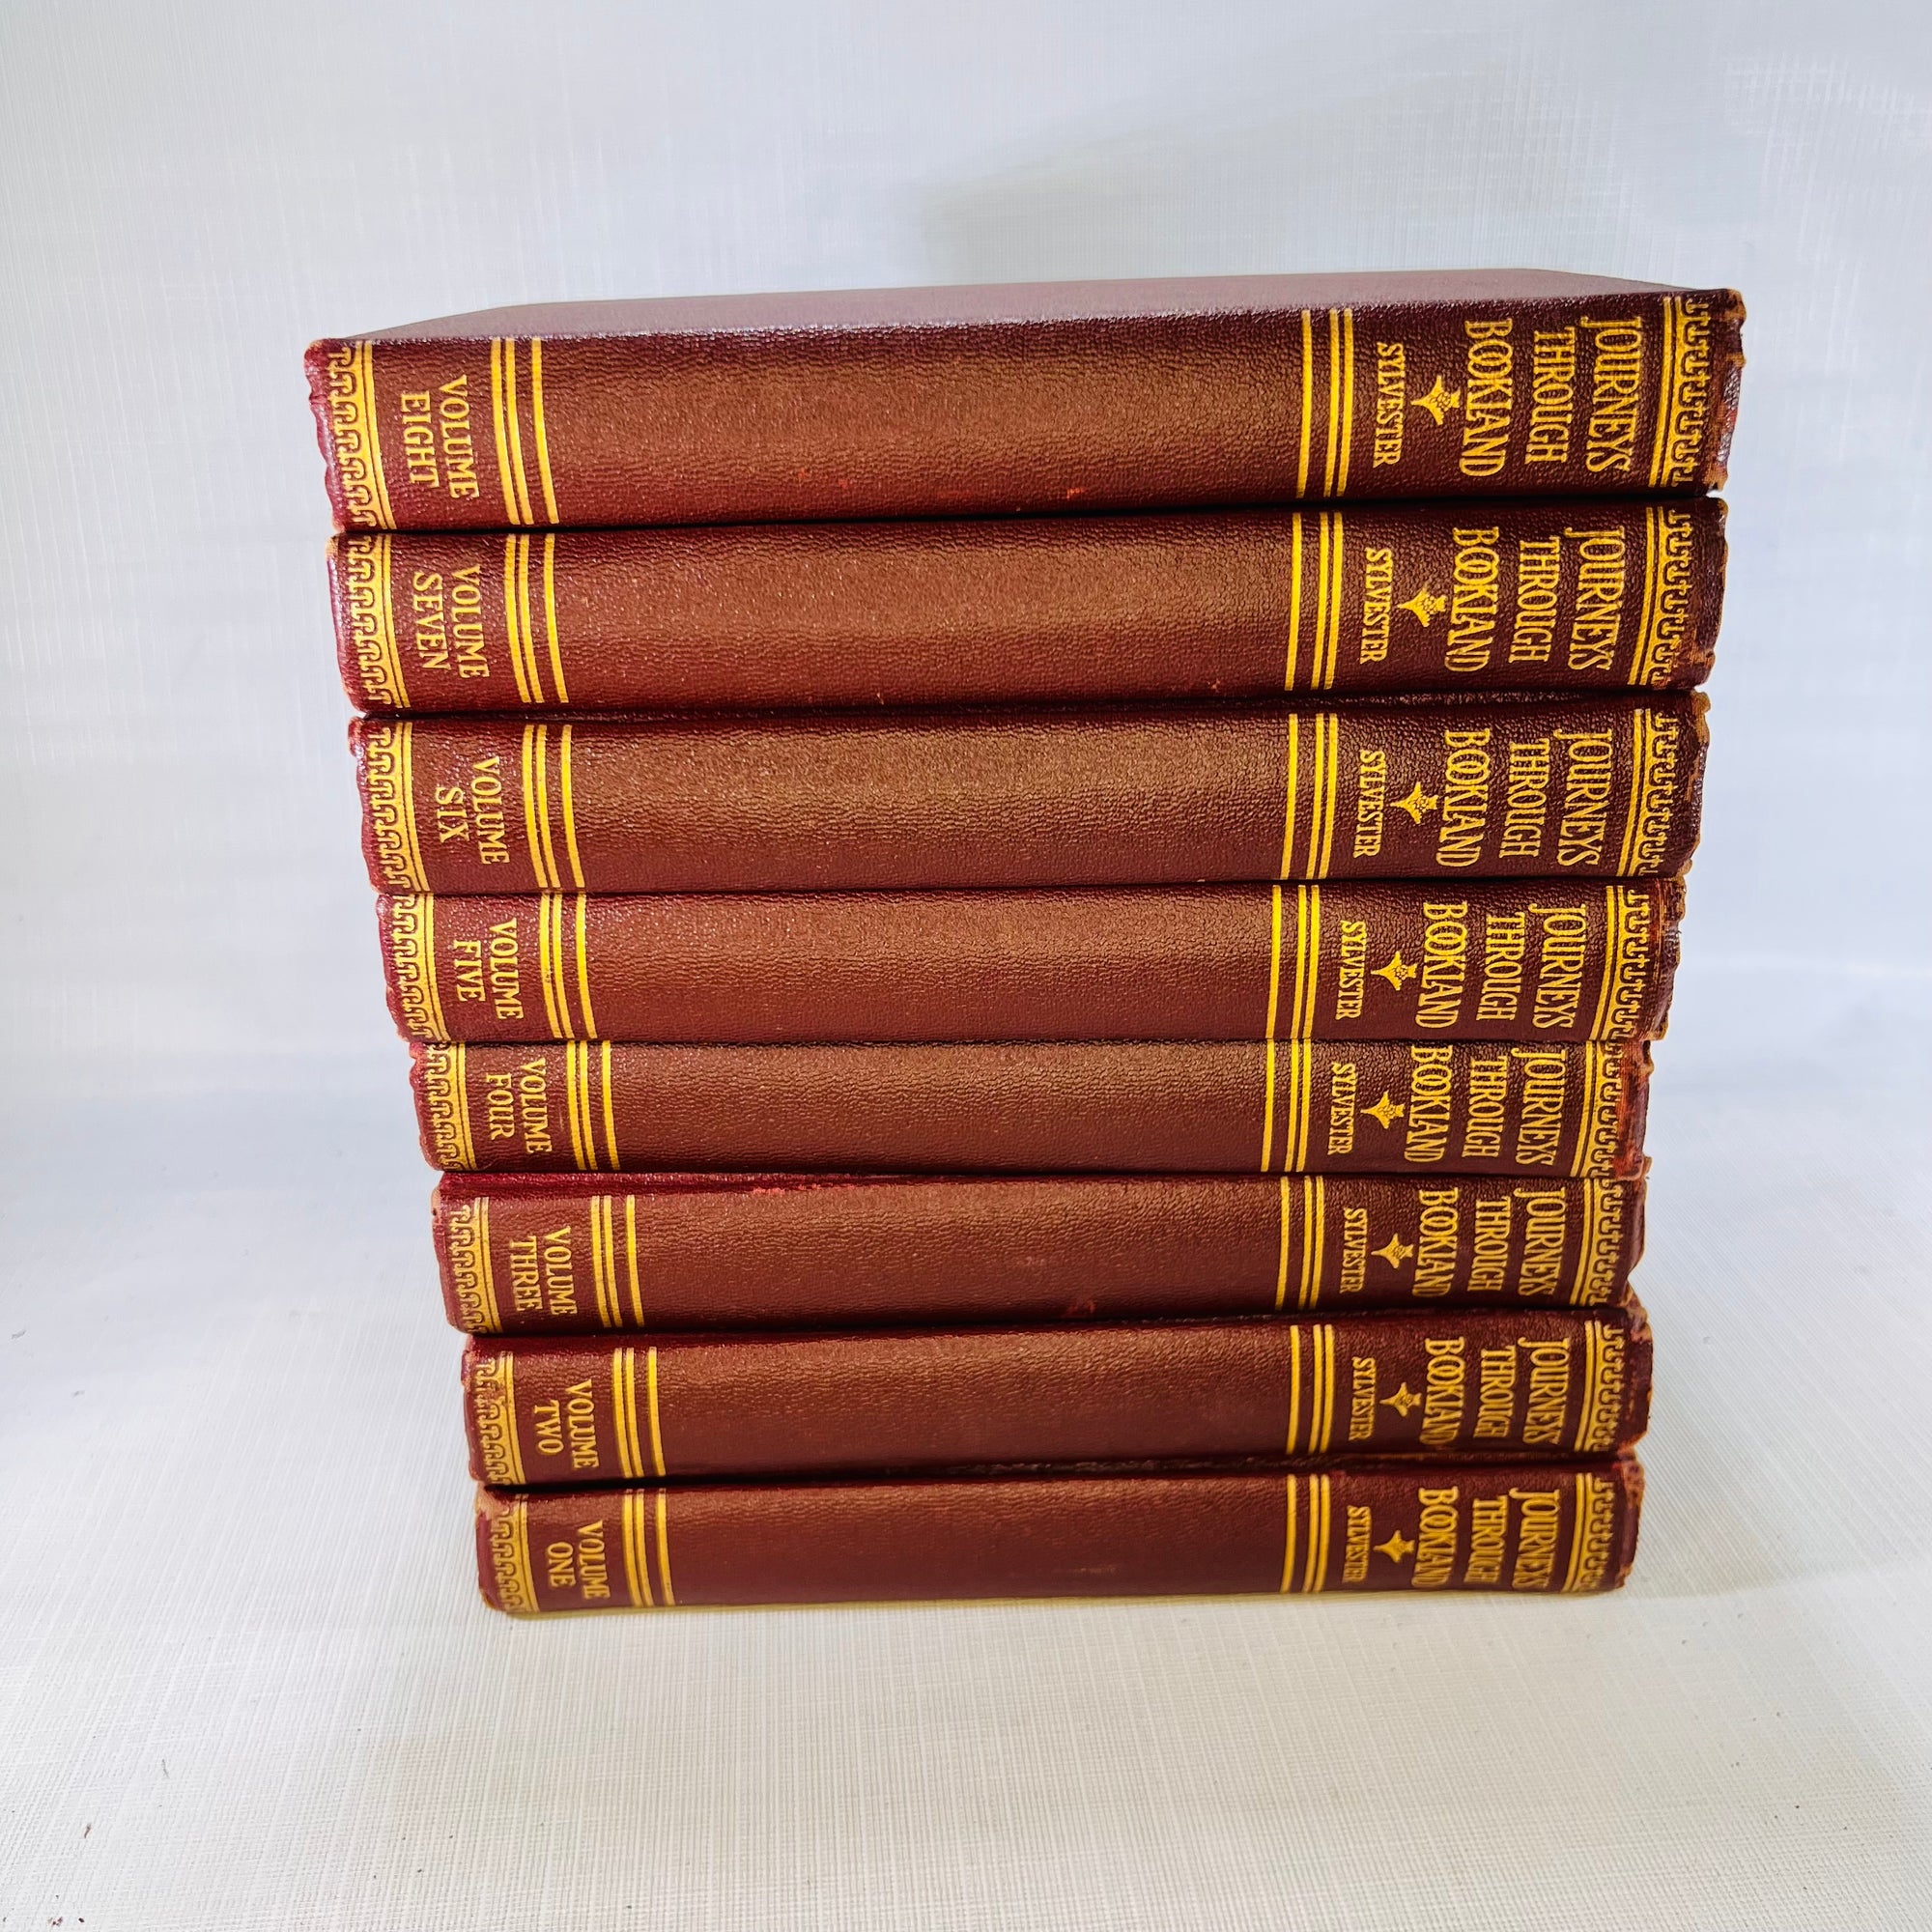 Journeys Through Bookland Volumes One Thru Eight by Charles H. Sylvester 1955 Bellows-Reeve Company